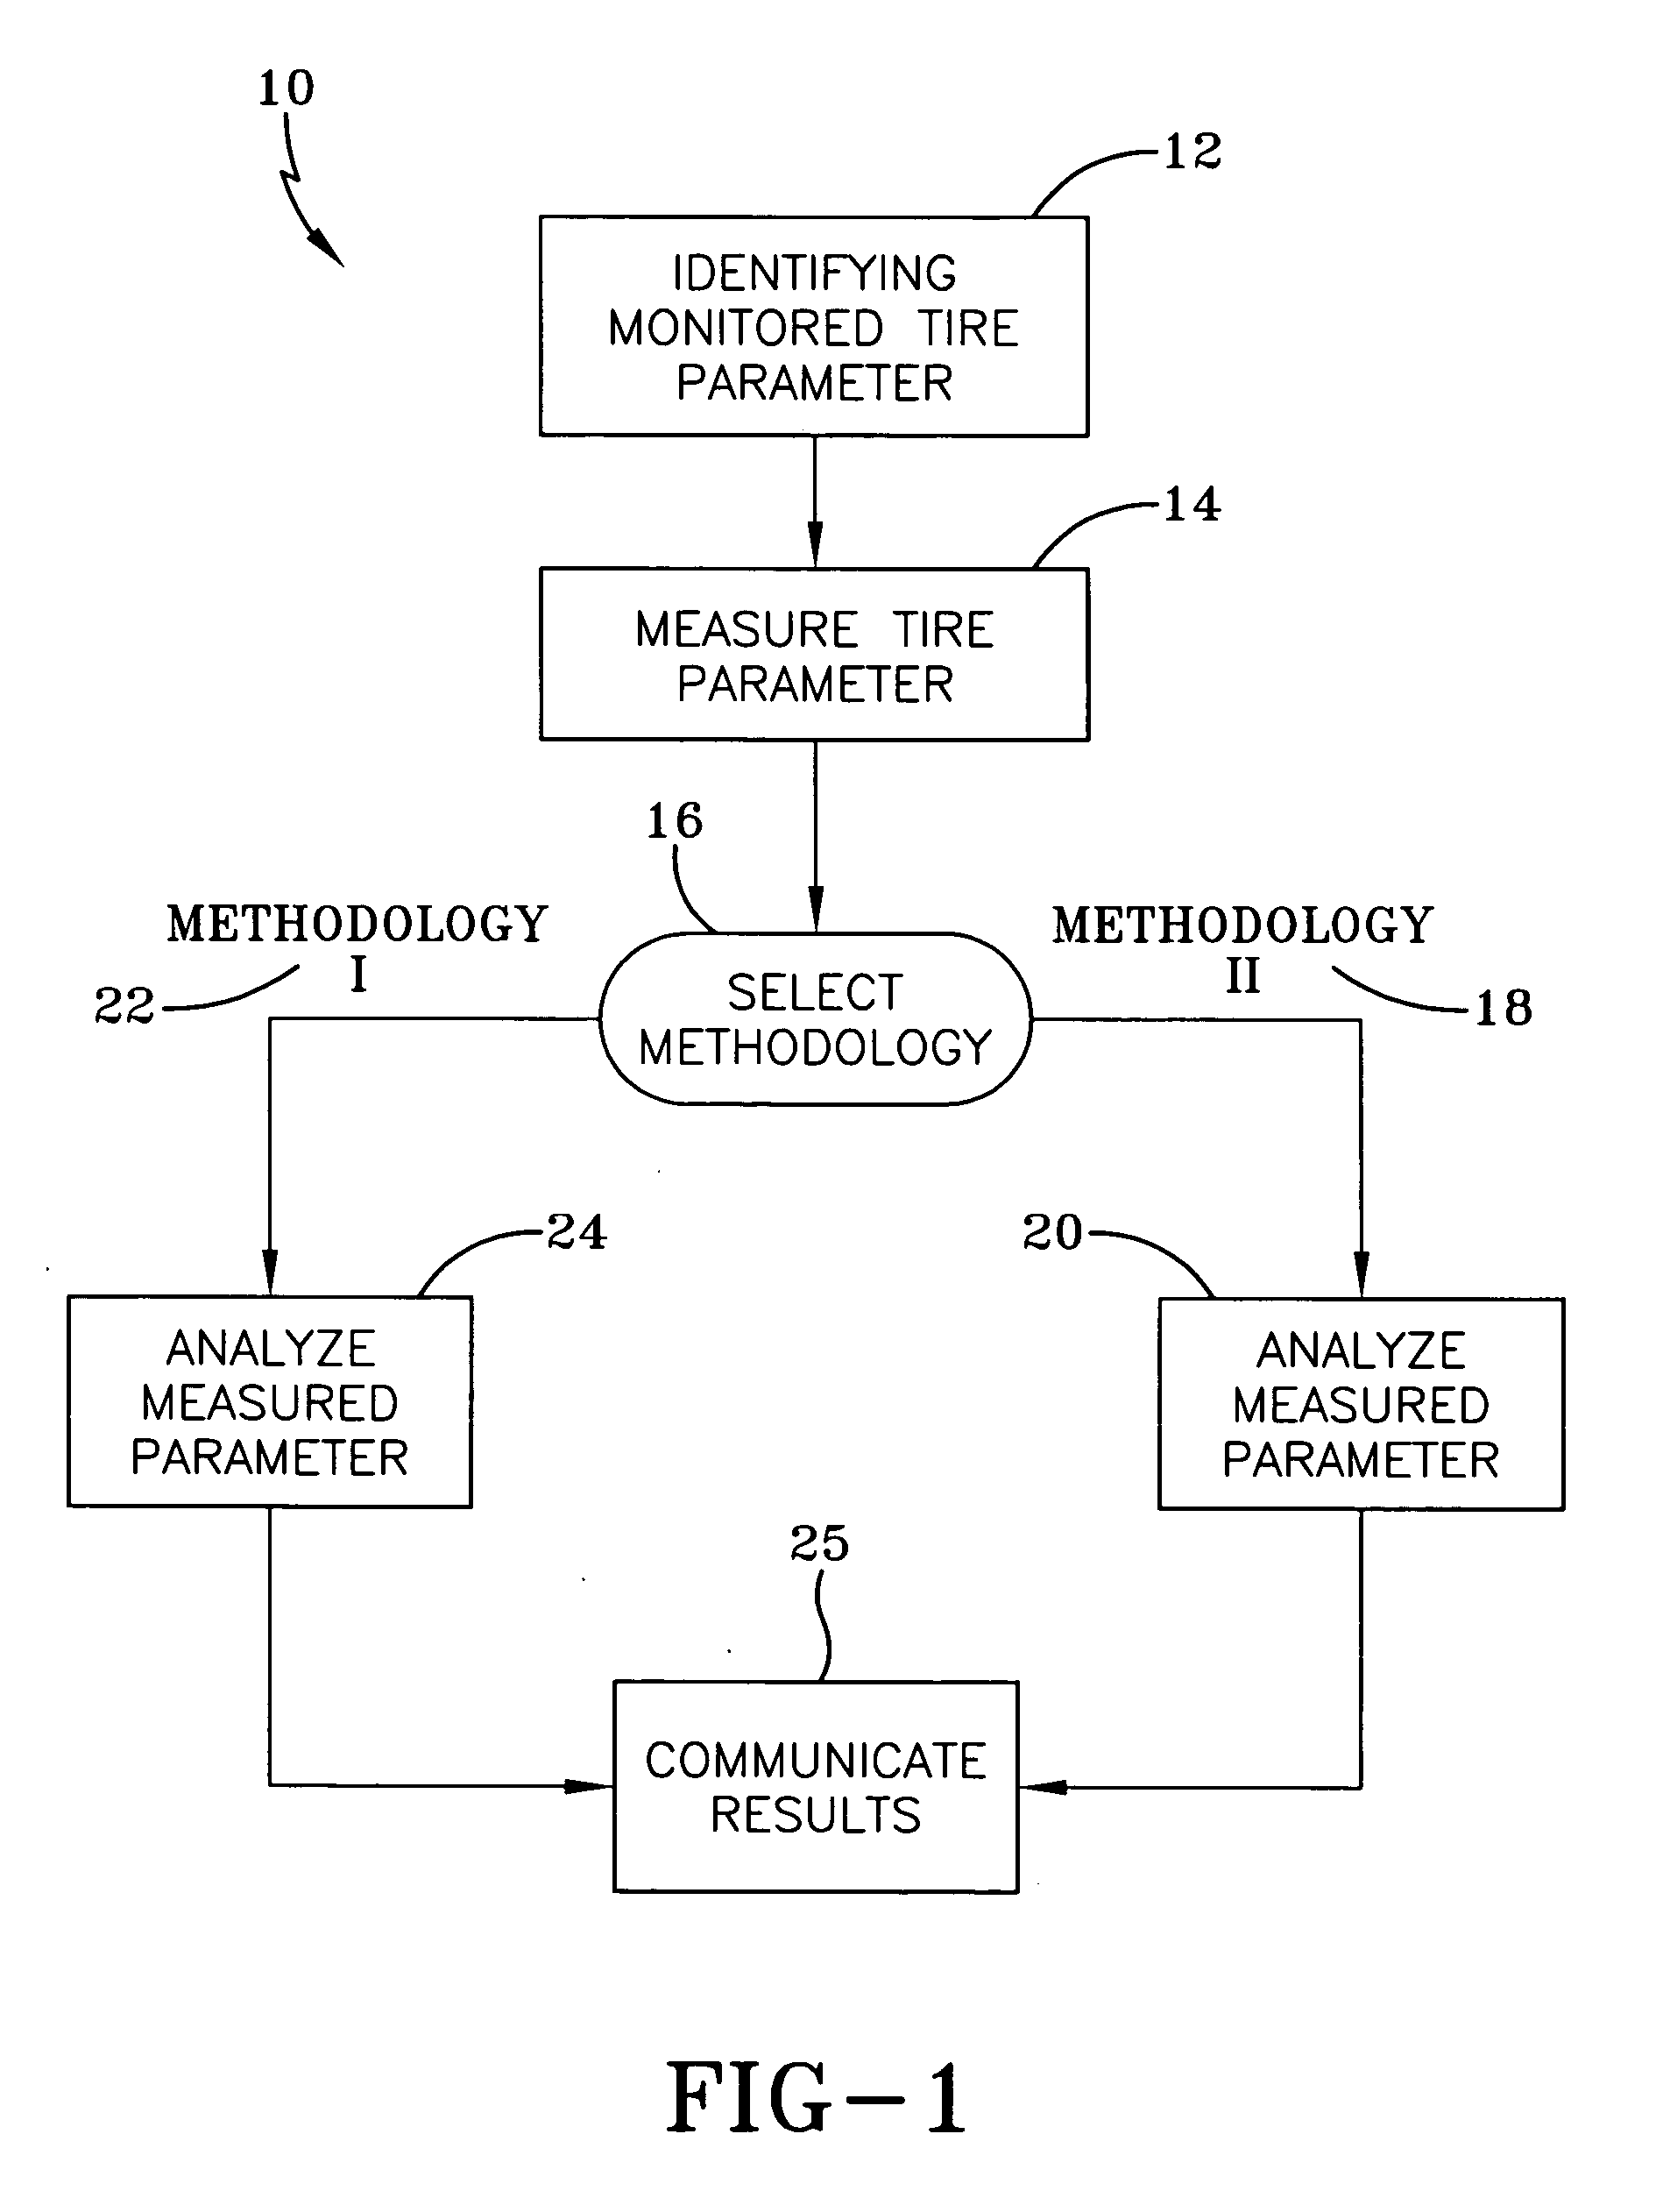 Method for detection of low leak rates in a tire